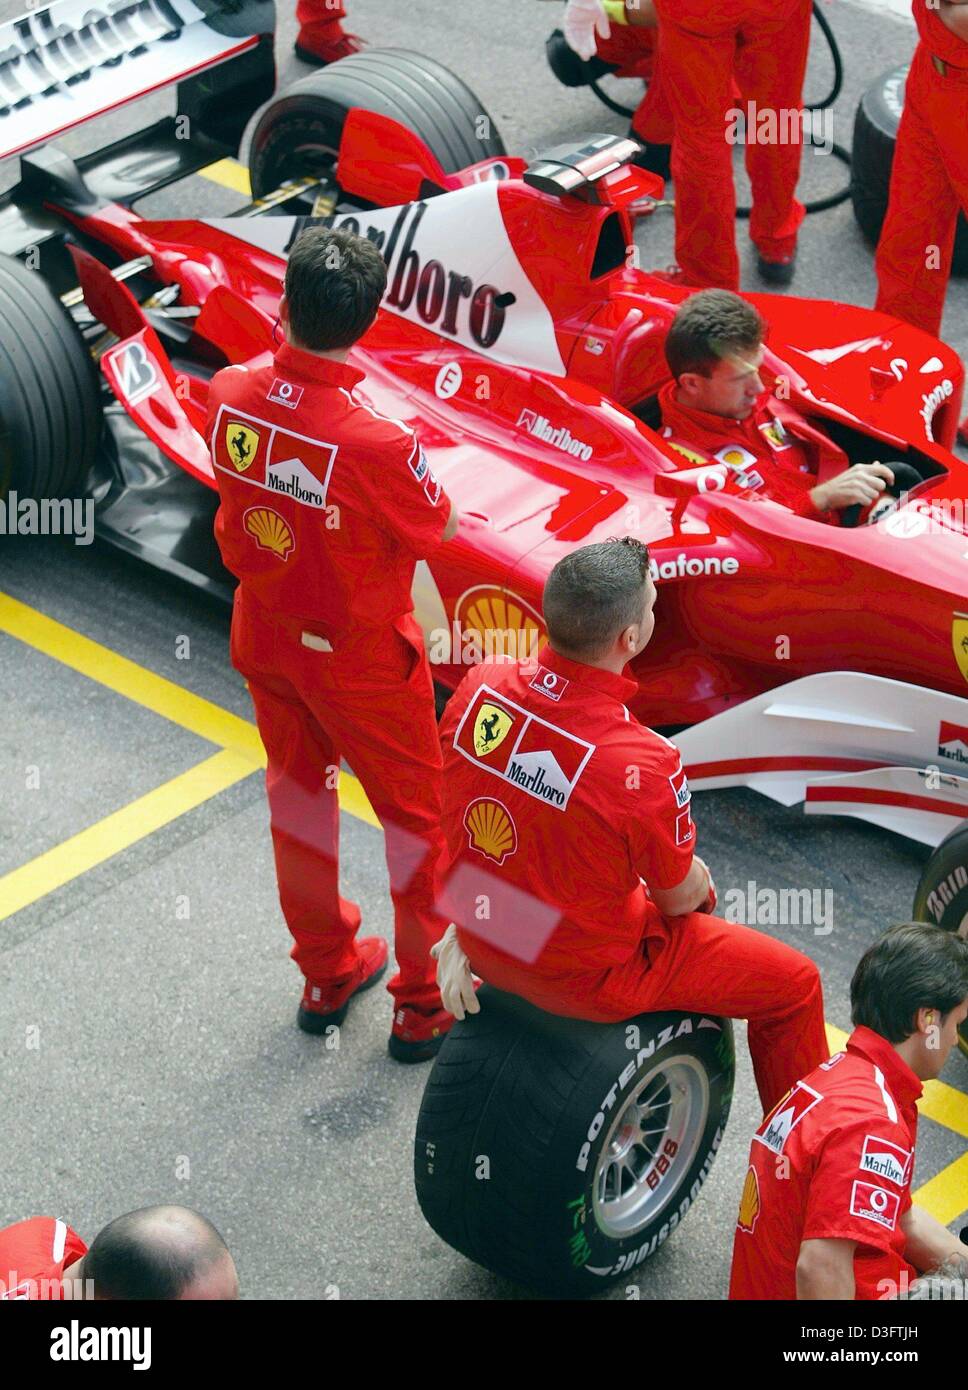 (dpa) - Ferrari mechanics stand in the pit line to rehearse a pit stop for the new Ferrari F2003-GA ahead of the first training at the Circuit de Catalunya near Barcelona, 2 May 2003. The car will make its race debut in the Spanish Formula One GP on 4 May 2003. Stock Photo